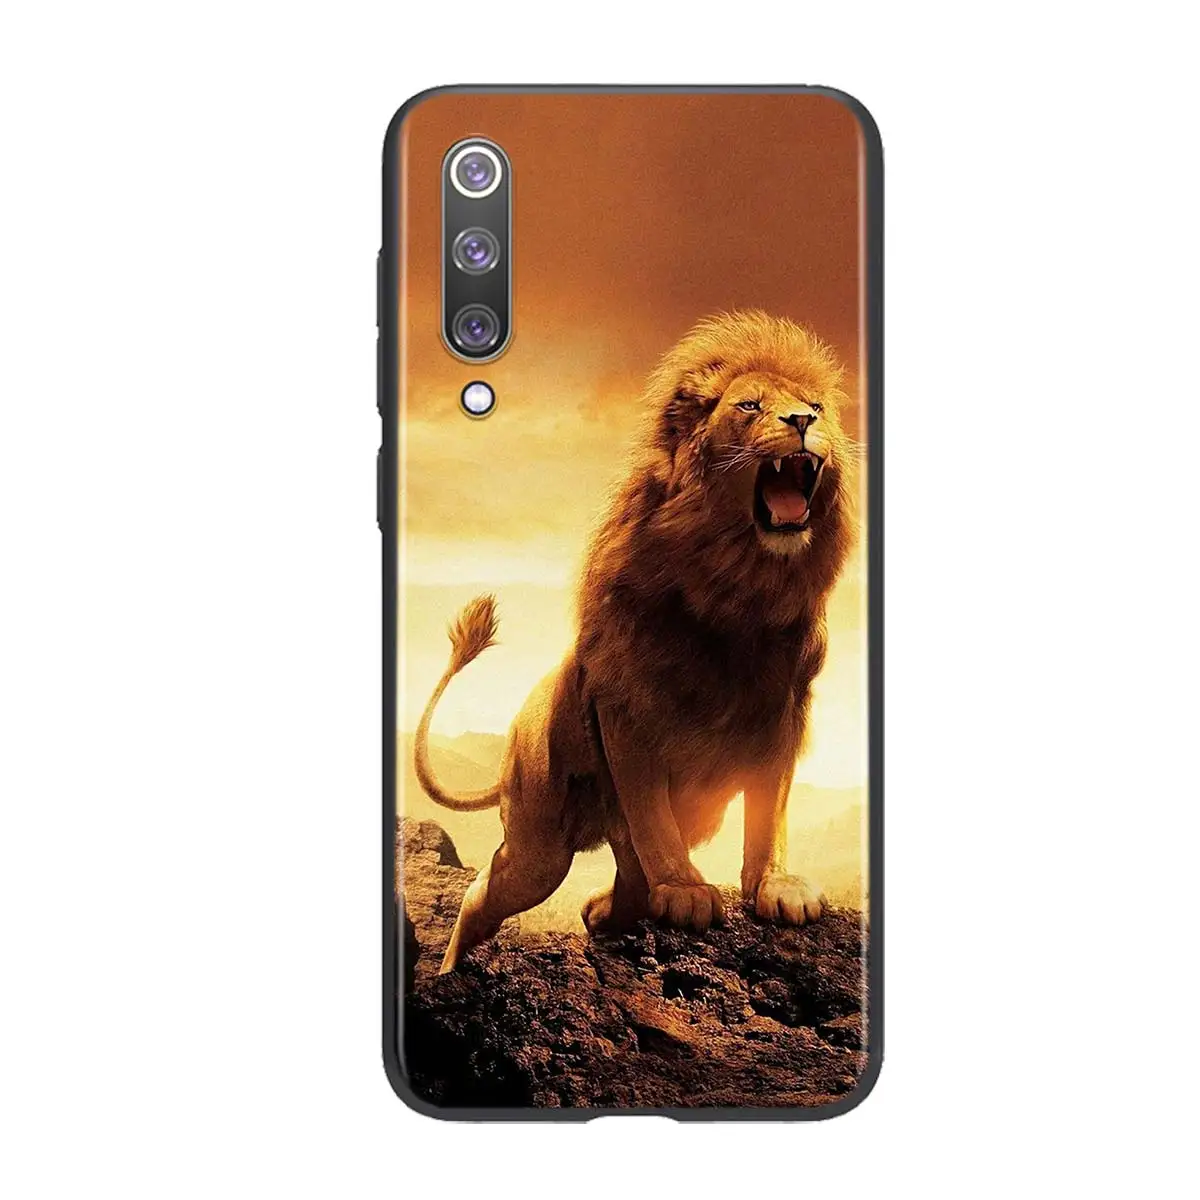 The Lion king animal For Xiaomi Mi 11 10T Note 10 Poco X3 NFC M2 X2 F2 C3 M3 Play Mix 3 A2 8 Lite Pro Phone Case best phone cases for xiaomi